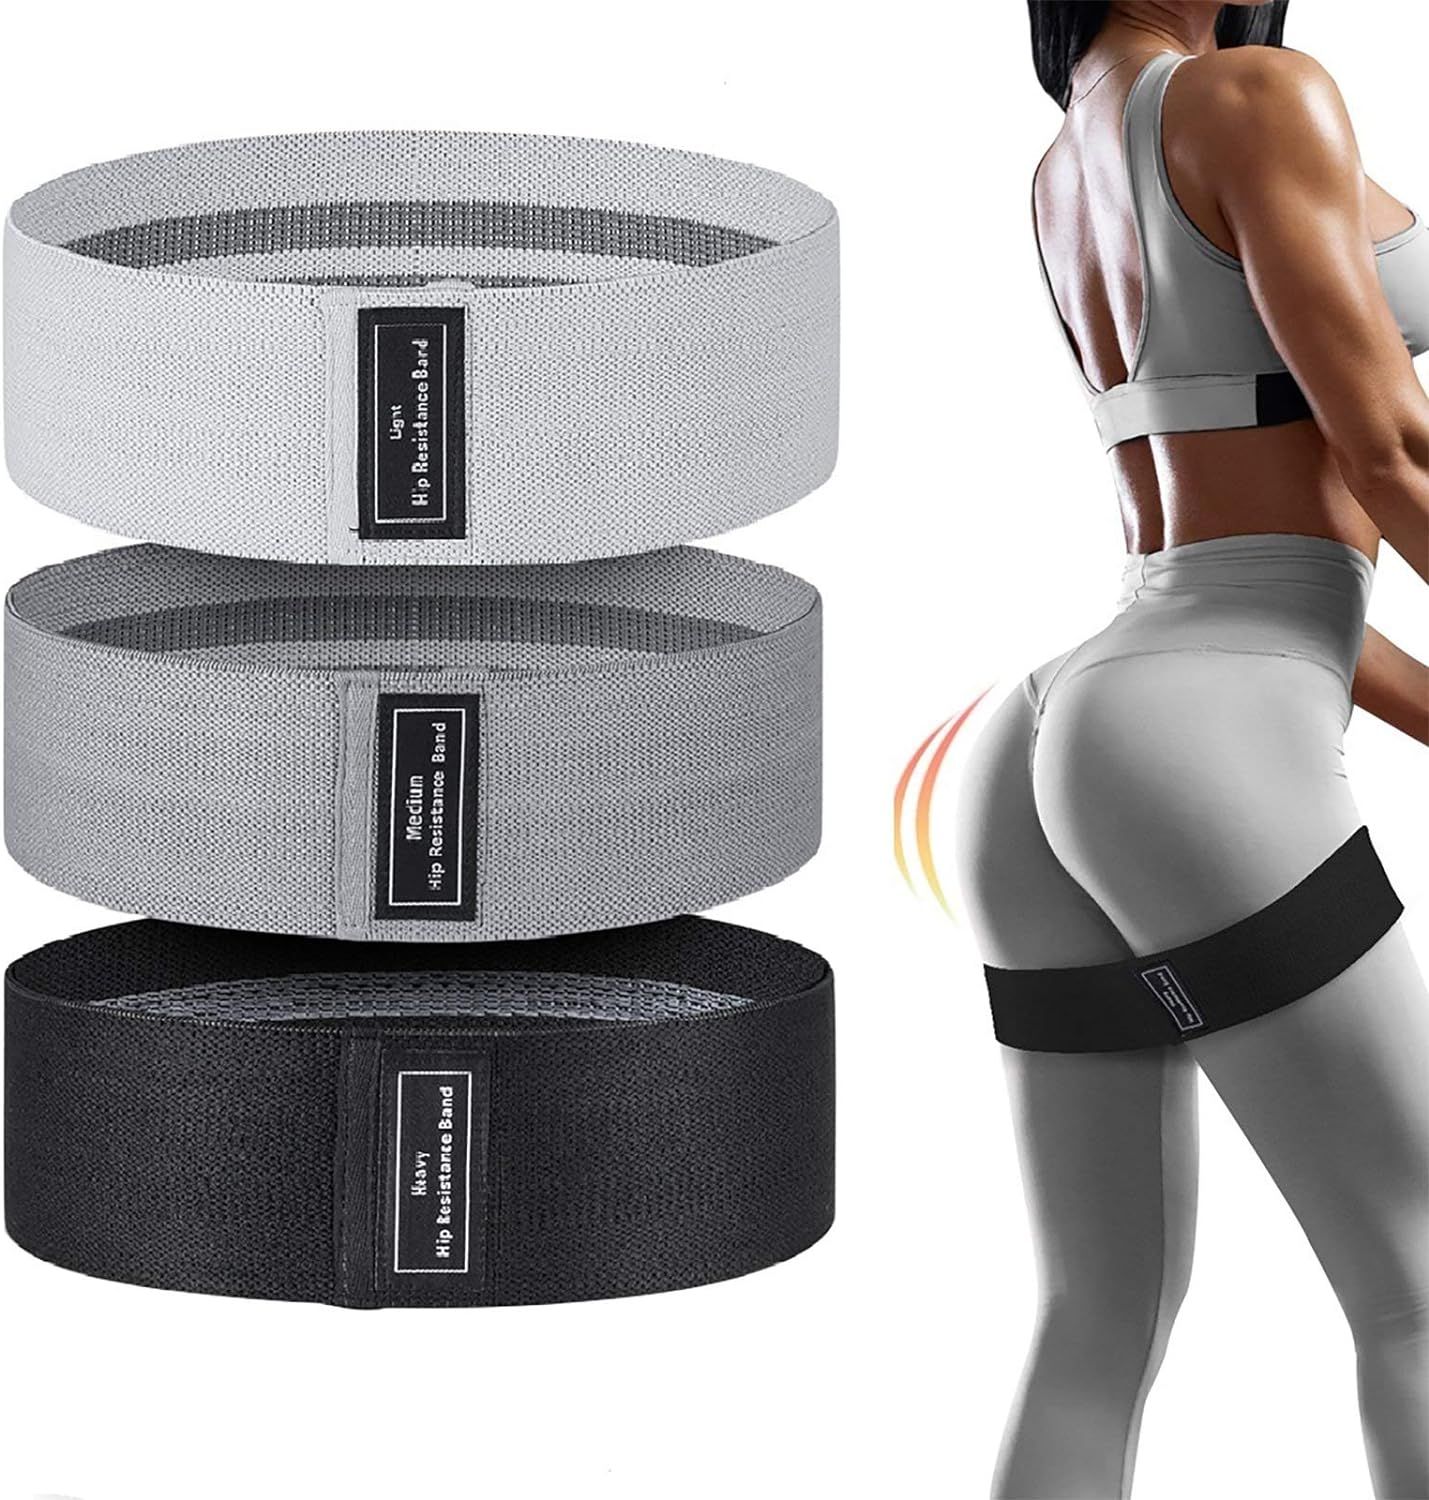 Booty Bands, Resistance Bands, 3 Levels Exercise Bands for Legs and Butt | Amazon (US)